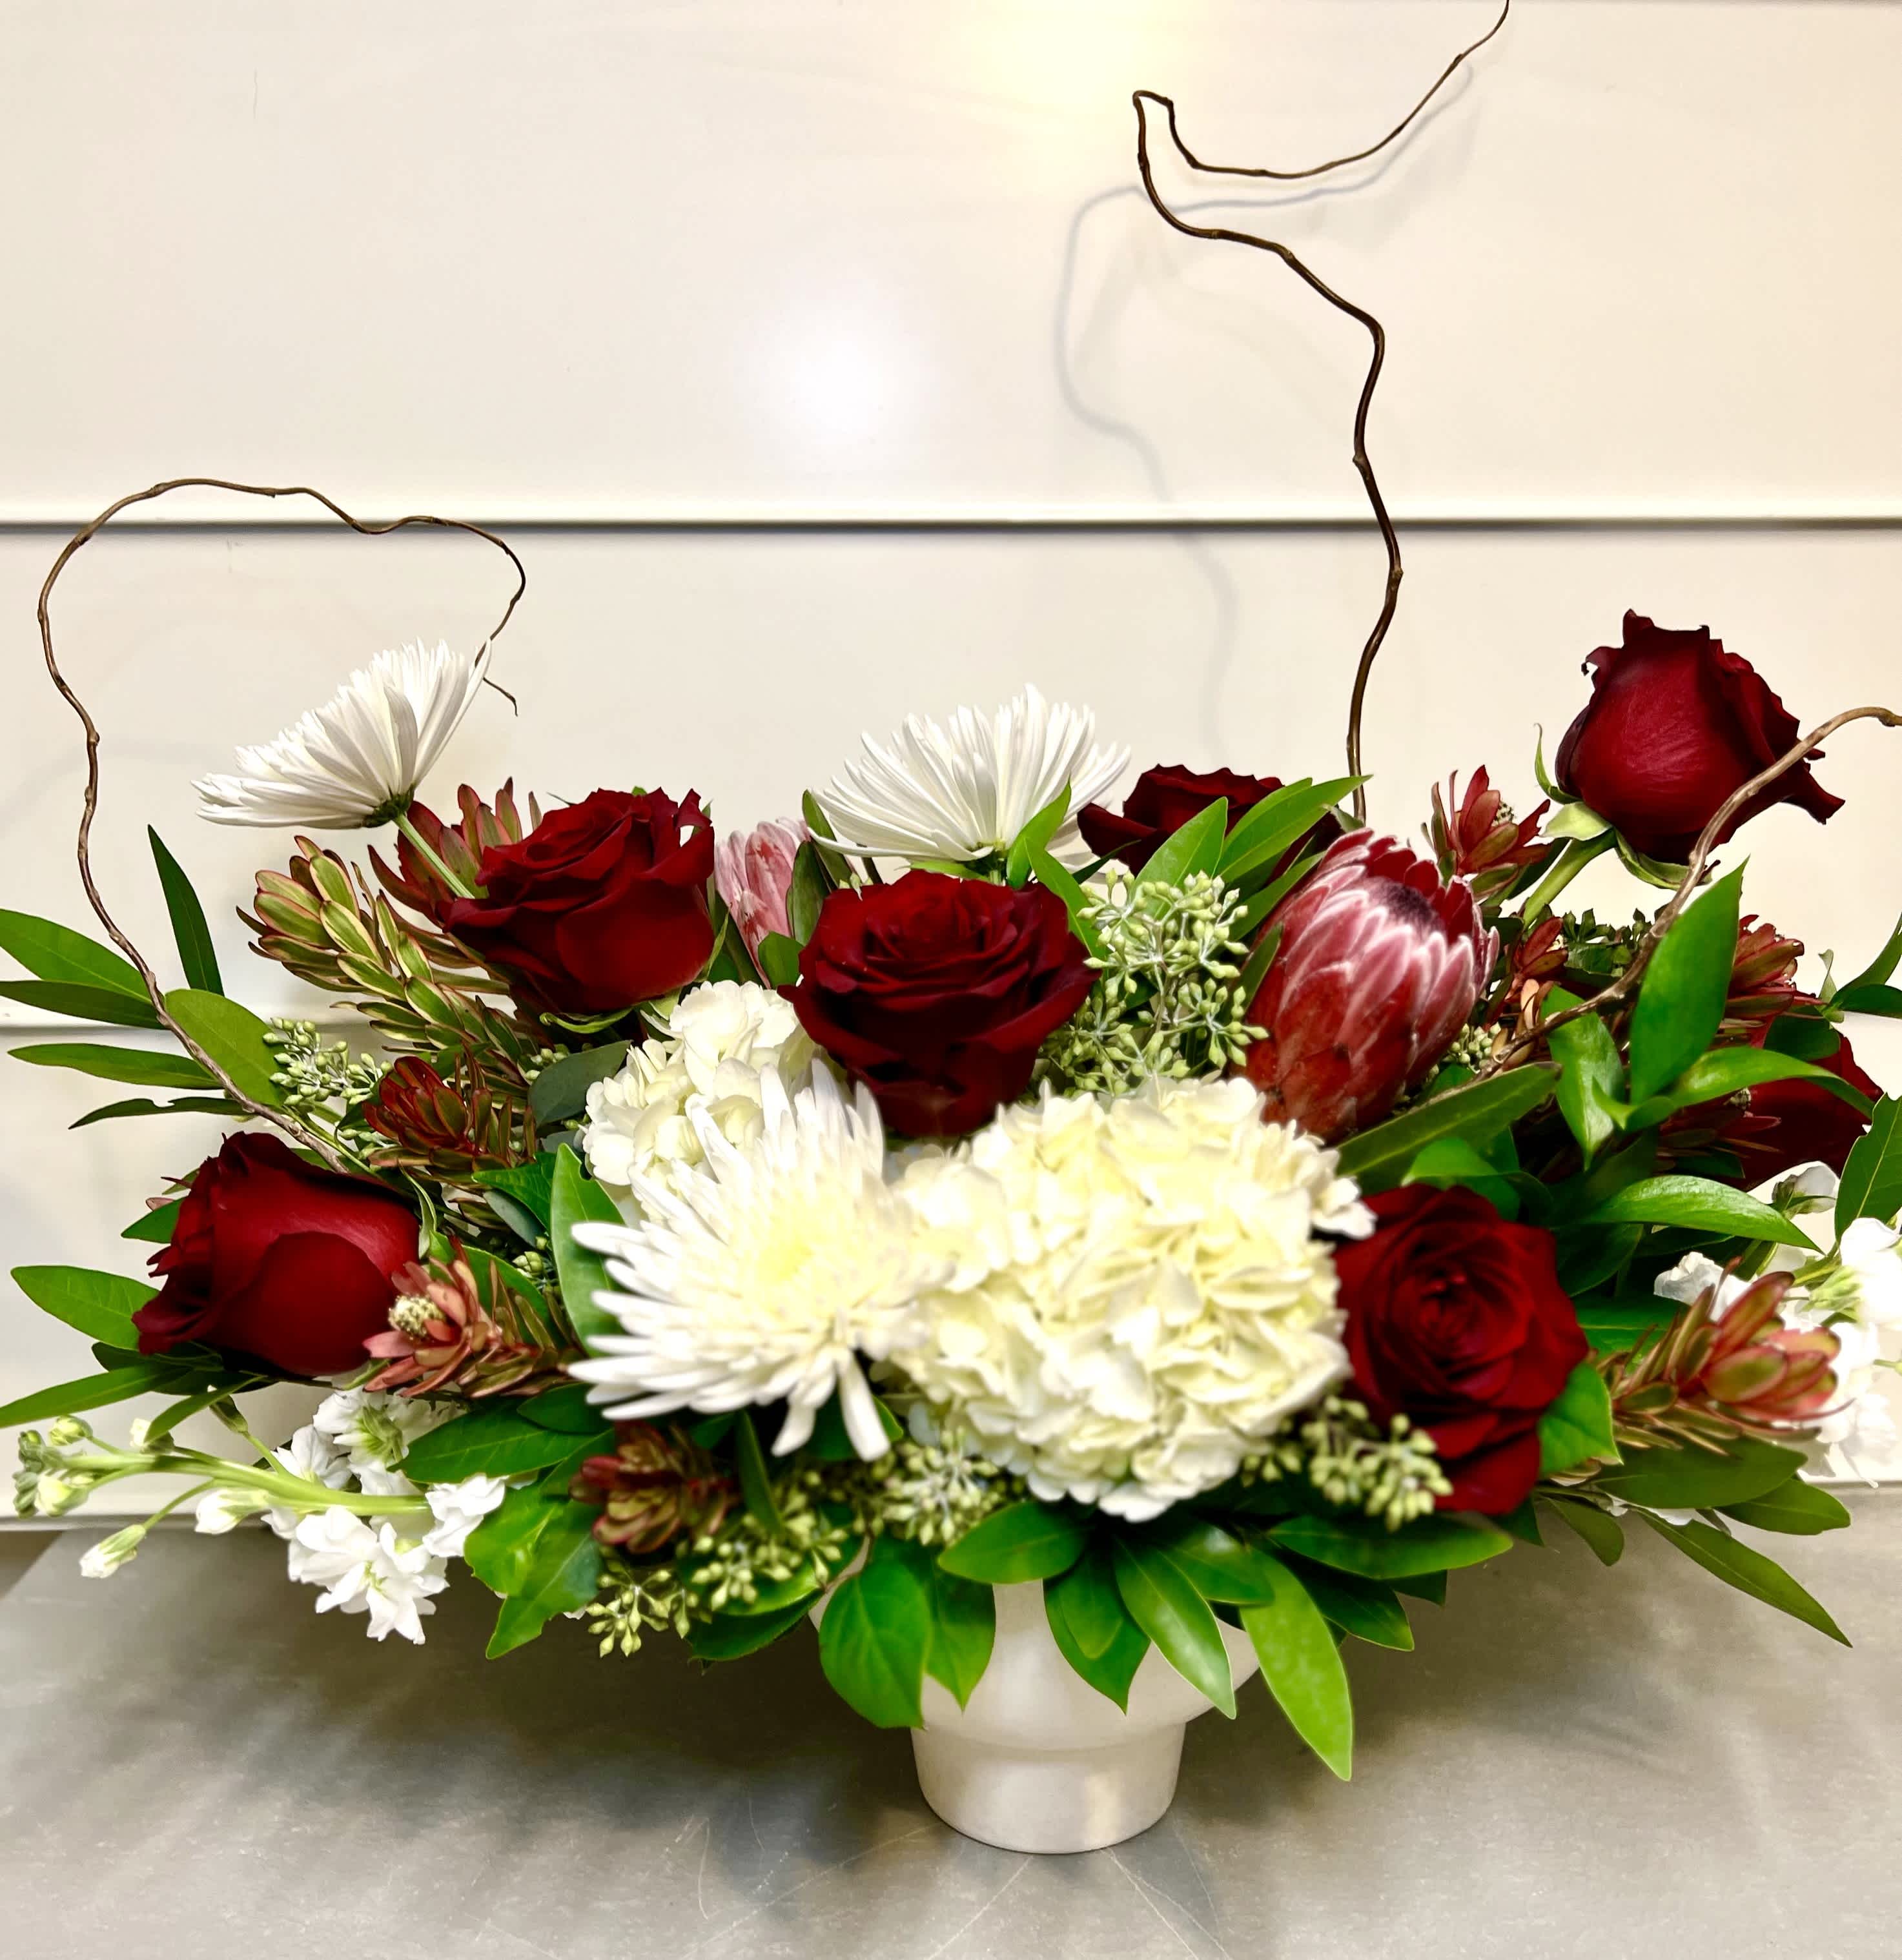 Teddy - This elegant arrangement includes roses, hydrangea, protea, chrysanthemum, leucadendron, stock, and filler with greens.  